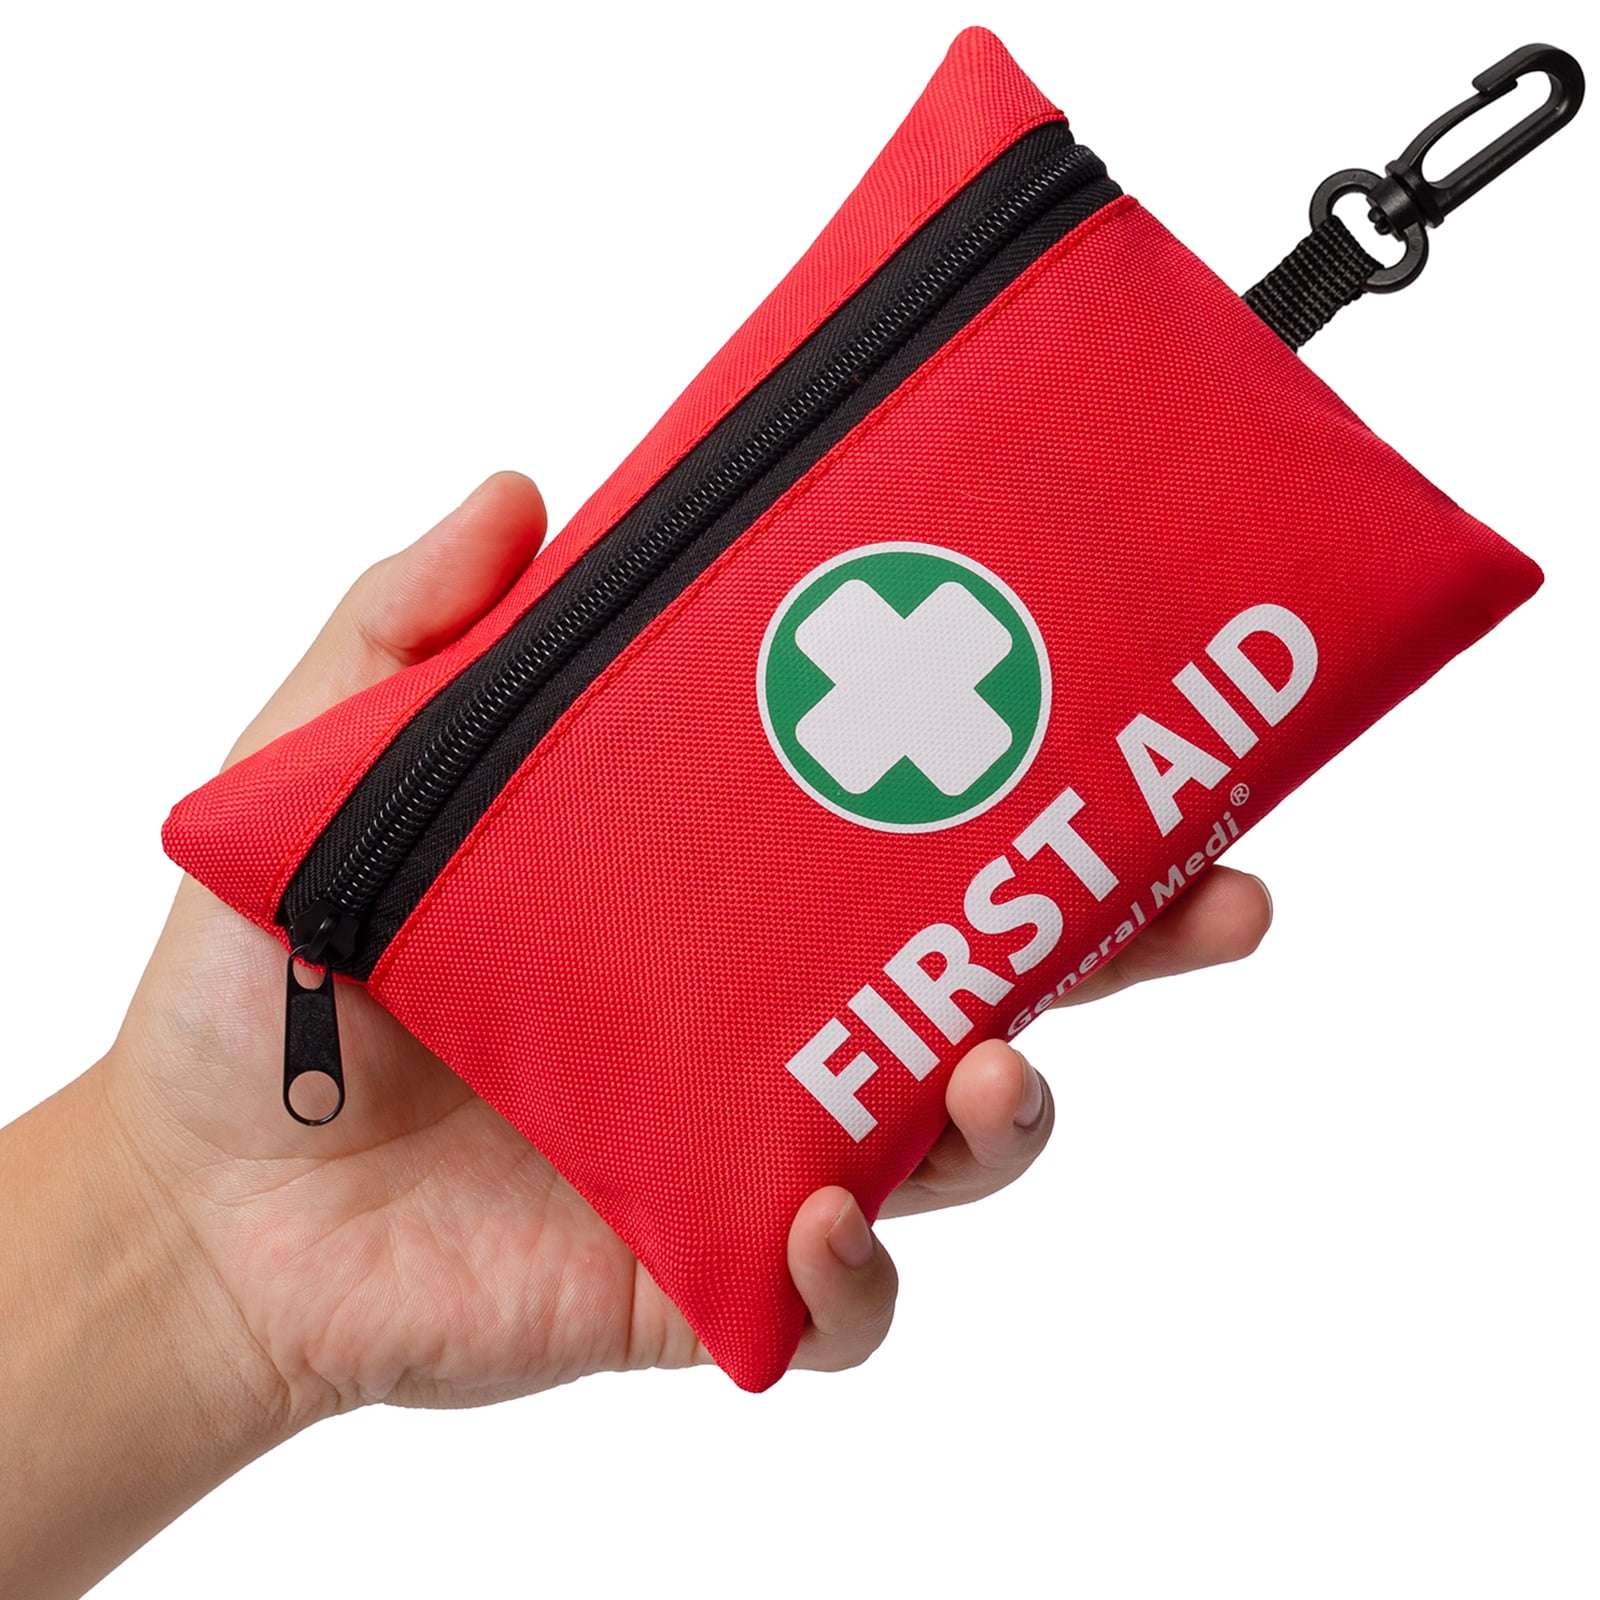  Care Science First Aid Kit, 110 Pieces  Professional Use for  Travel, Work, School, Home, Car, Survival, Camping, Hiking, and More :  Health & Household